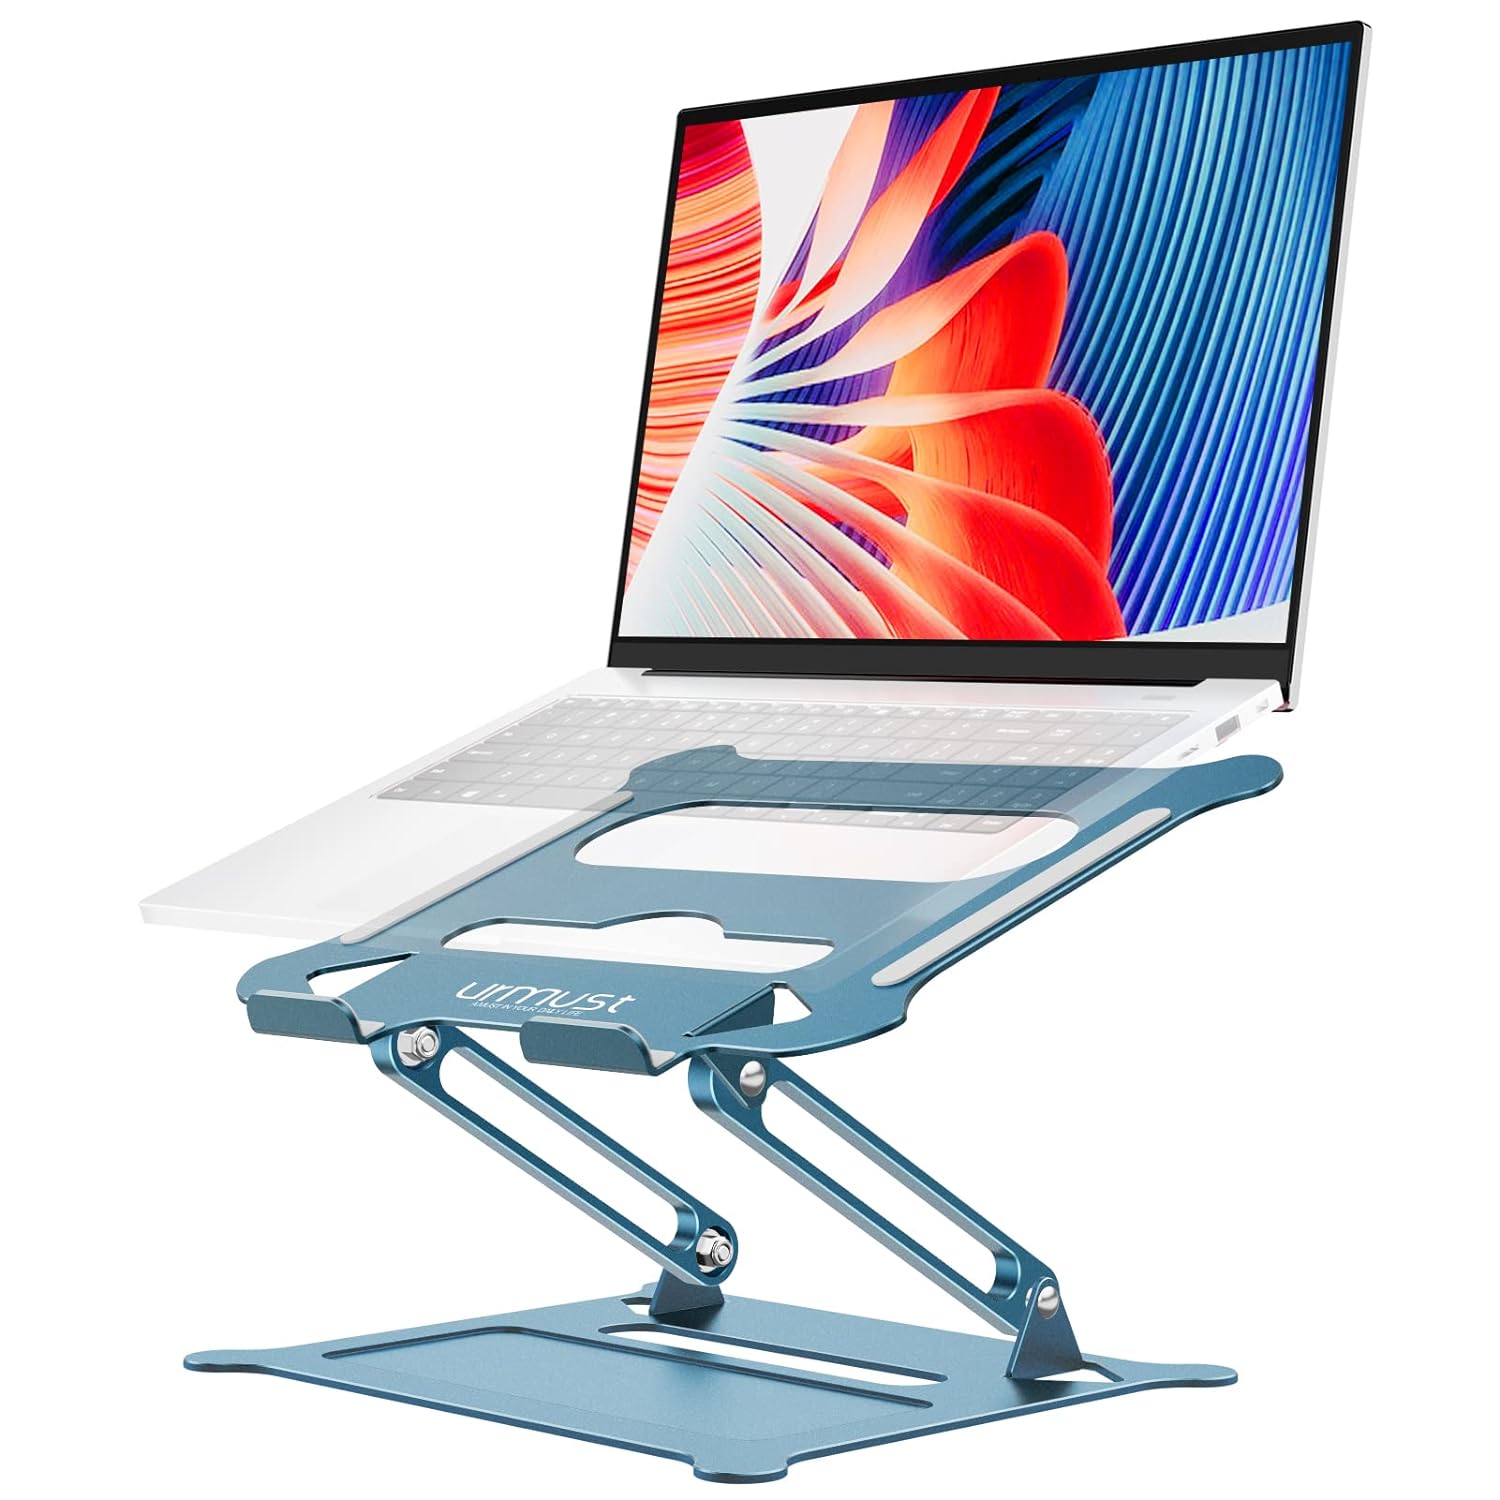 Urmust Laptop Notebook Stand Holder Ergonomic Adjustable Ultrabook Stand Riser Portable Compatible with MacBook Air Pro HP Dell XPS Lenovo All laptops 10-15.6"(Blue)